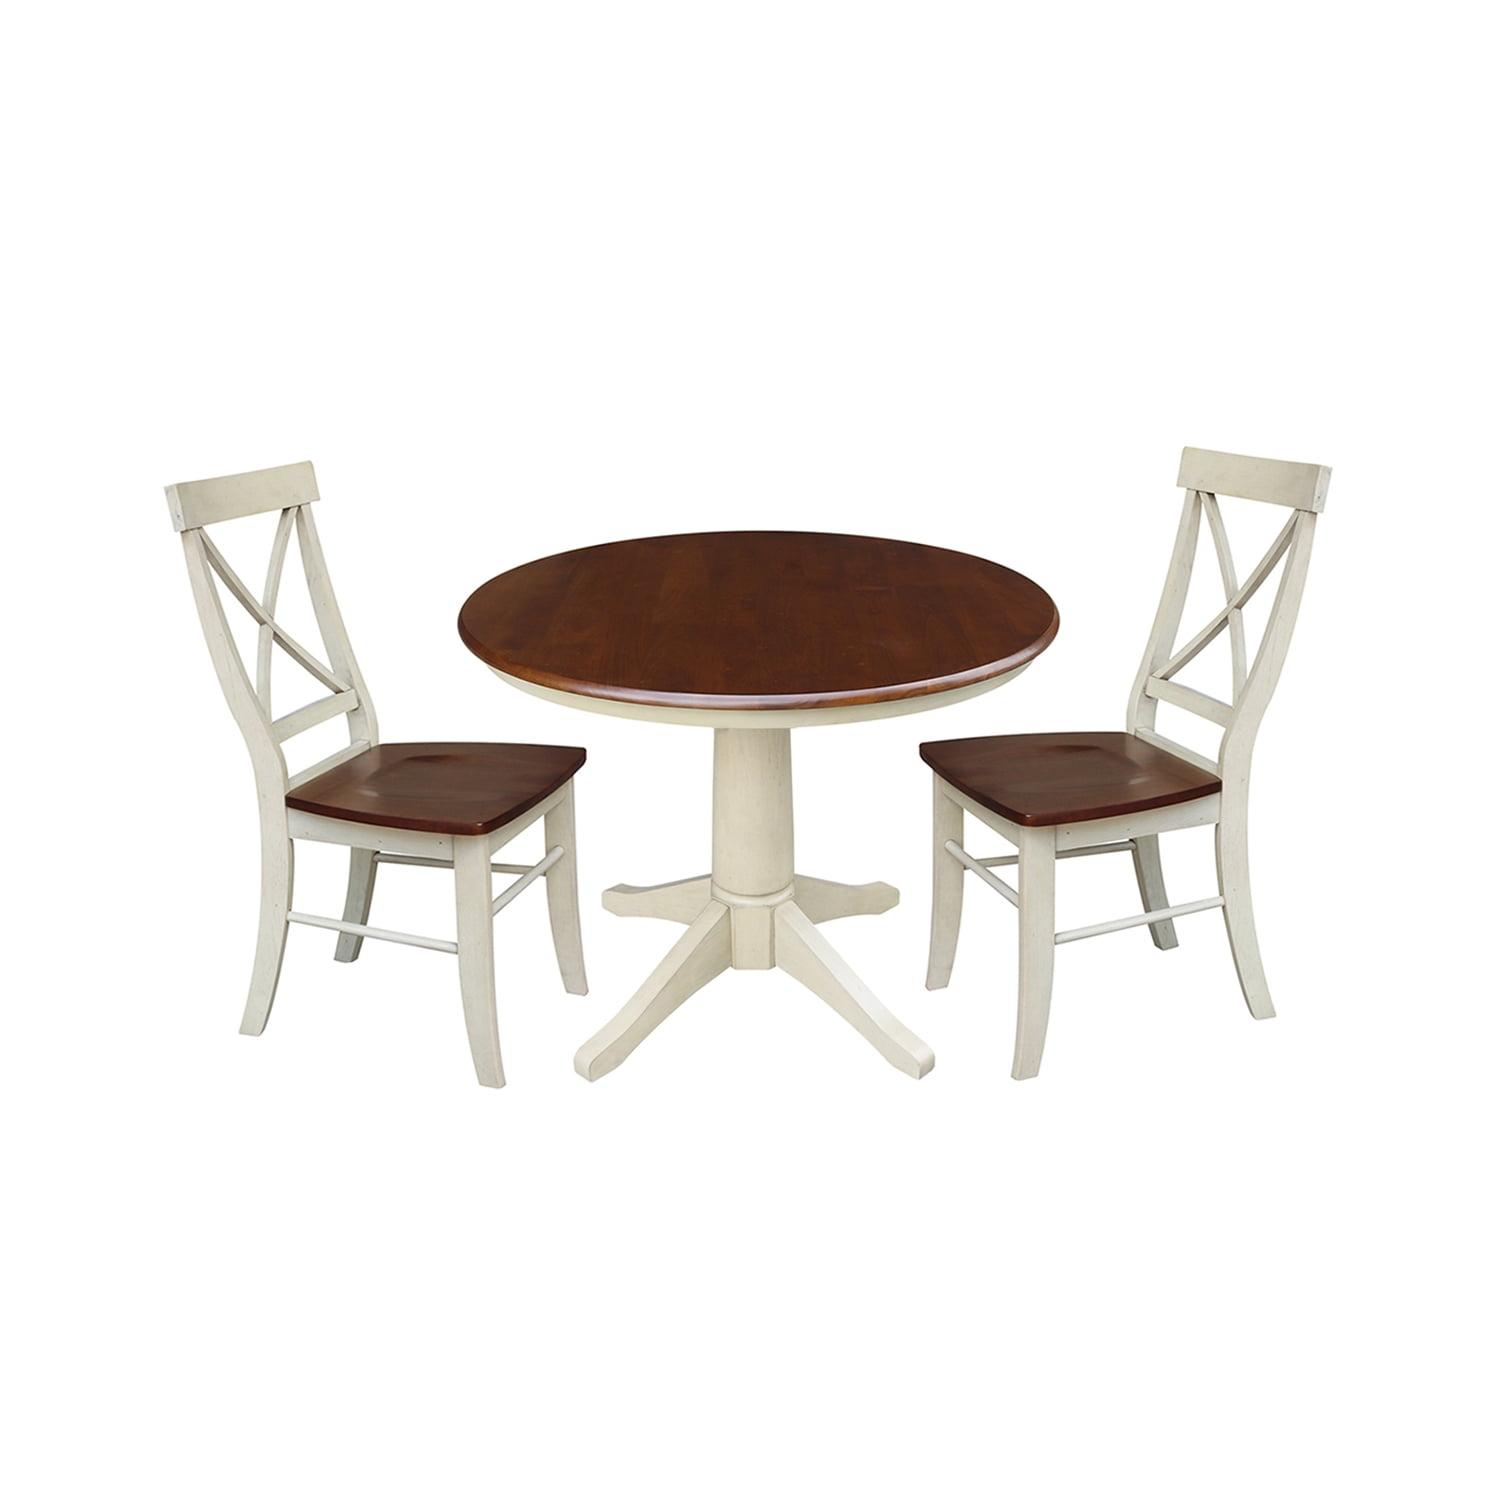 36" Almond Espresso Wood Round Dining Table with 2 Cross Back Chairs